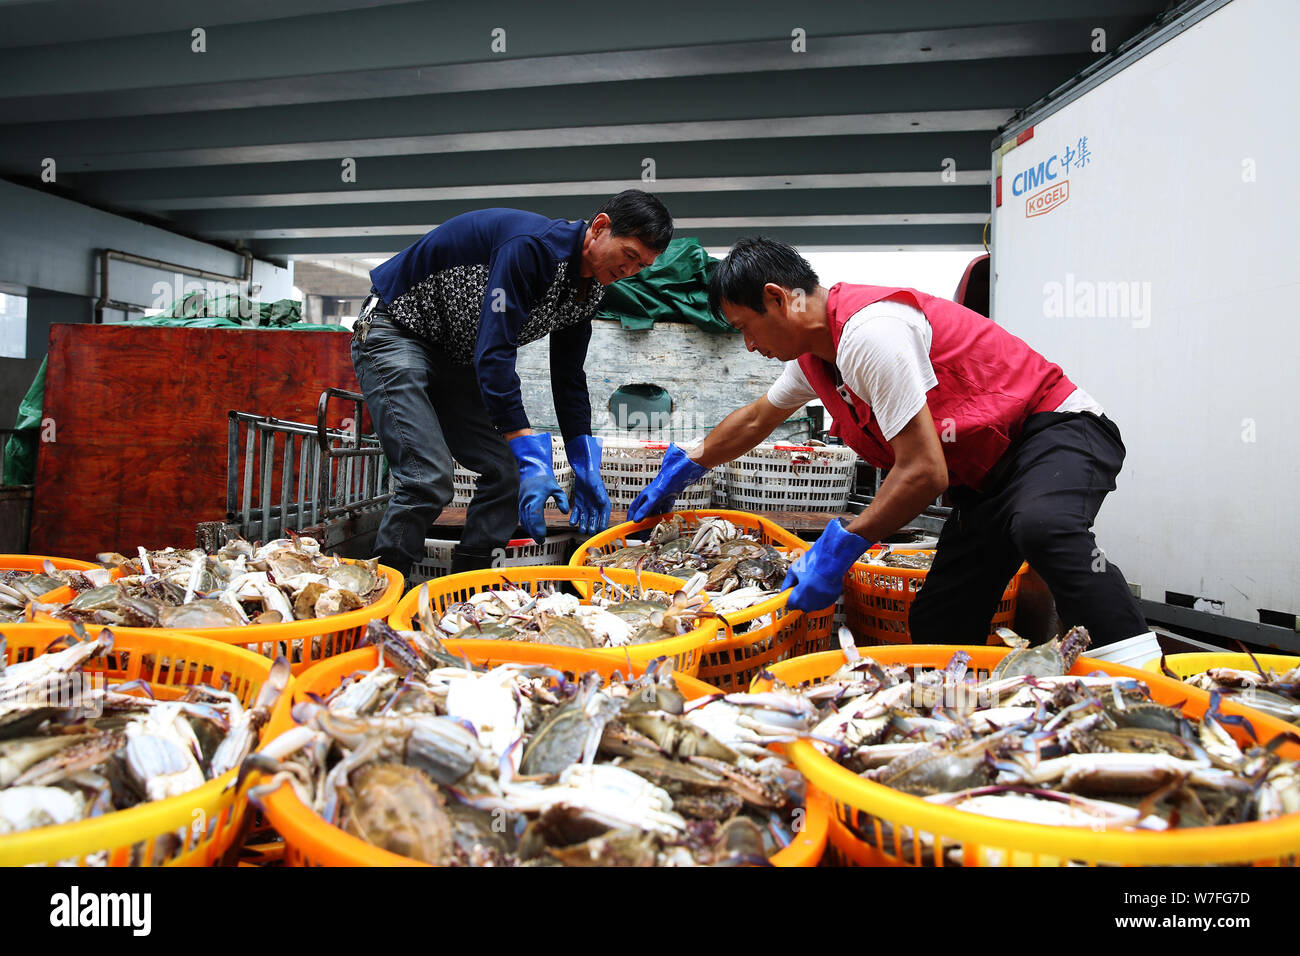 Fishermen load portunid crabs after the lifting of a fishing ban at a port in Zhoushan city, east China's Zhejiang province, 21 September 2017.   Fish Stock Photo